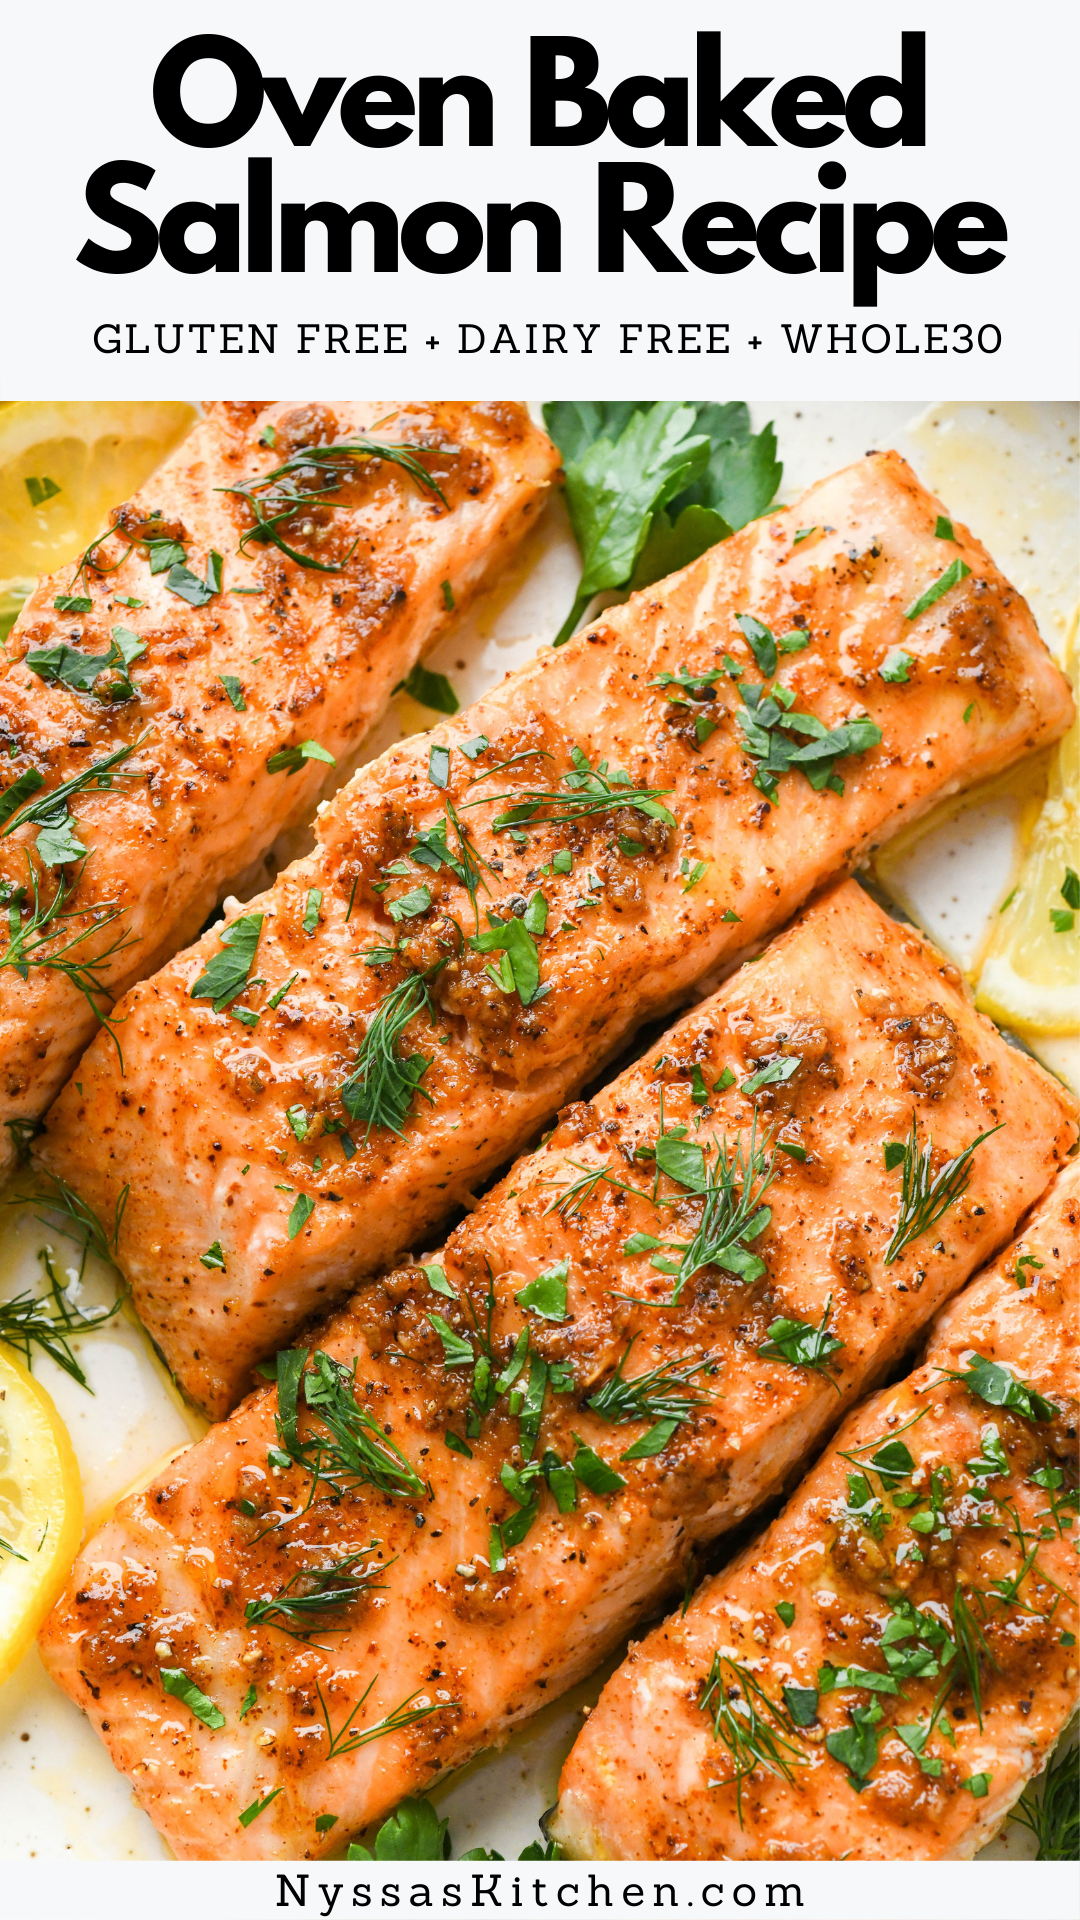 Say hello to the BEST healthy baked salmon recipe! Made with simple ingredients like garlic, paprika, avocado oil, lemon juice, salt, pepper, and fresh herbs. It is out of this world flavorful, perfectly cooked, and just as good for a busy weeknight dinner as it is for a dinner party. Gluten free, dairy free, Whole30, paleo, keto, and low carb.